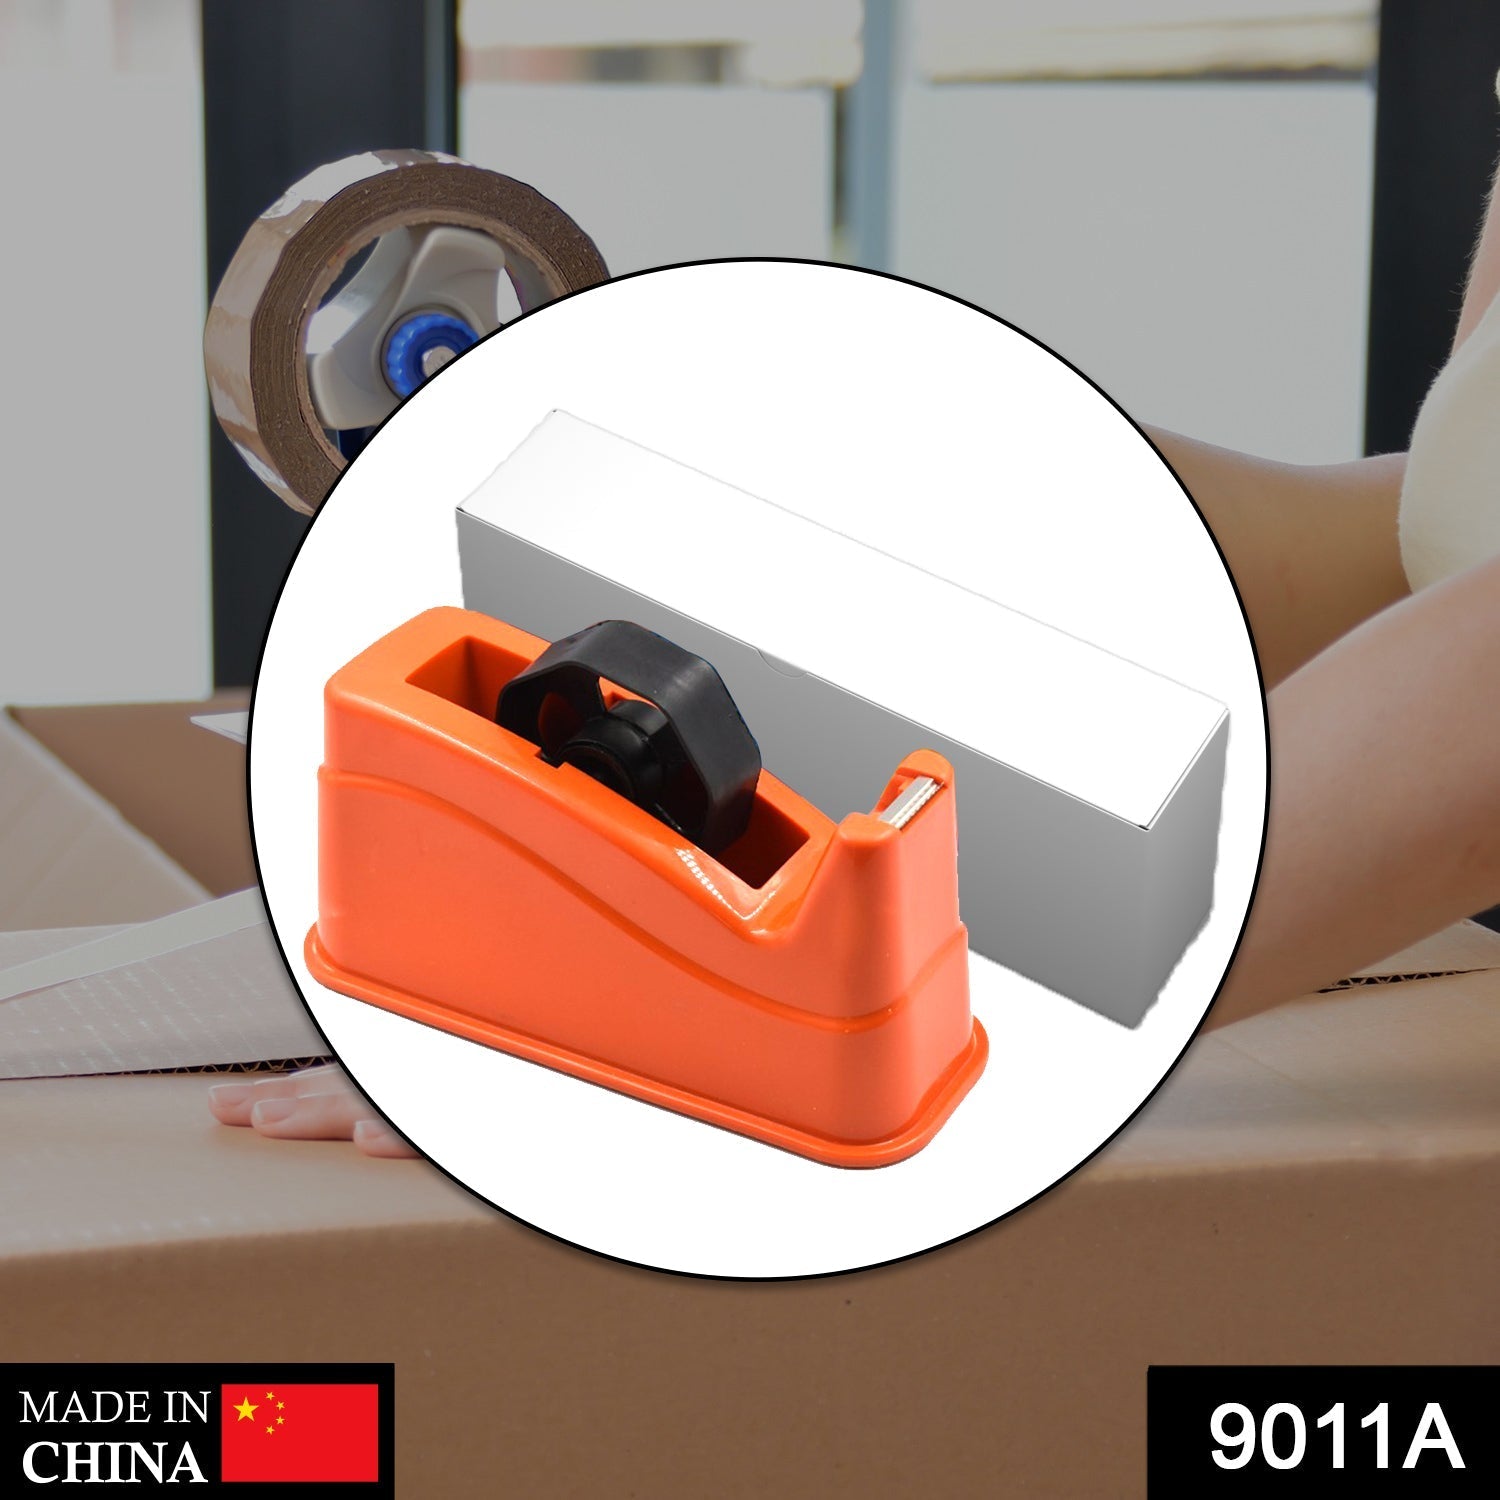 9011A Jumbo Tape Dispenser used in all kinds of household and official places for holding and cutting tapes etc. DeoDap